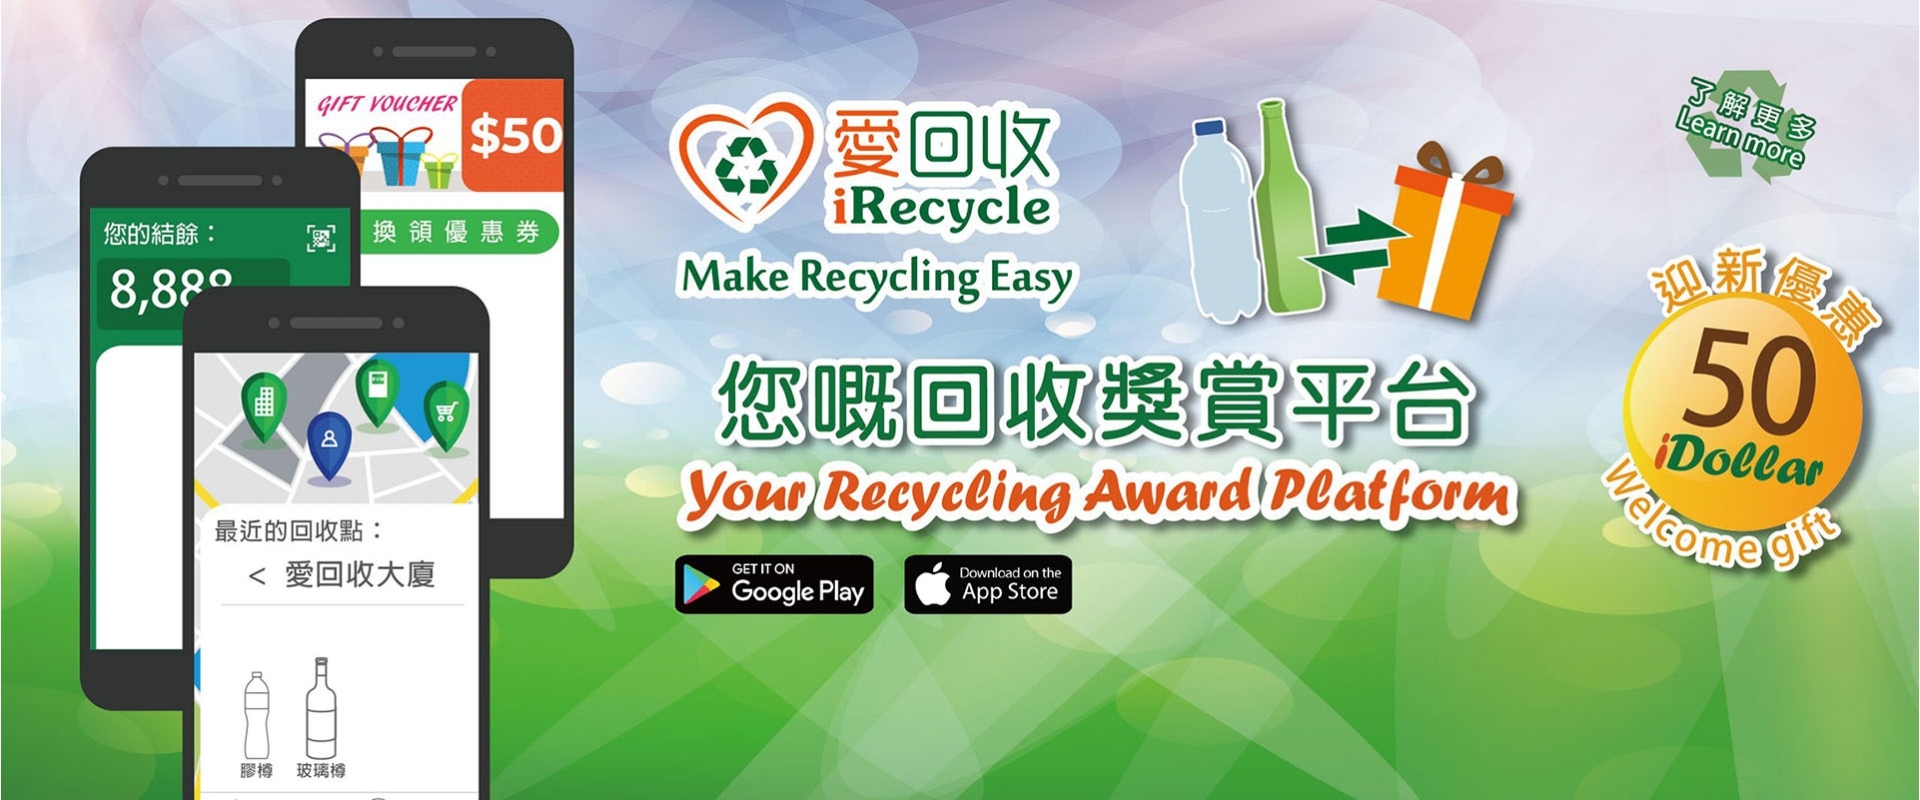 iRecycle-APP-introduction-V2_Website-banner-1-scaled